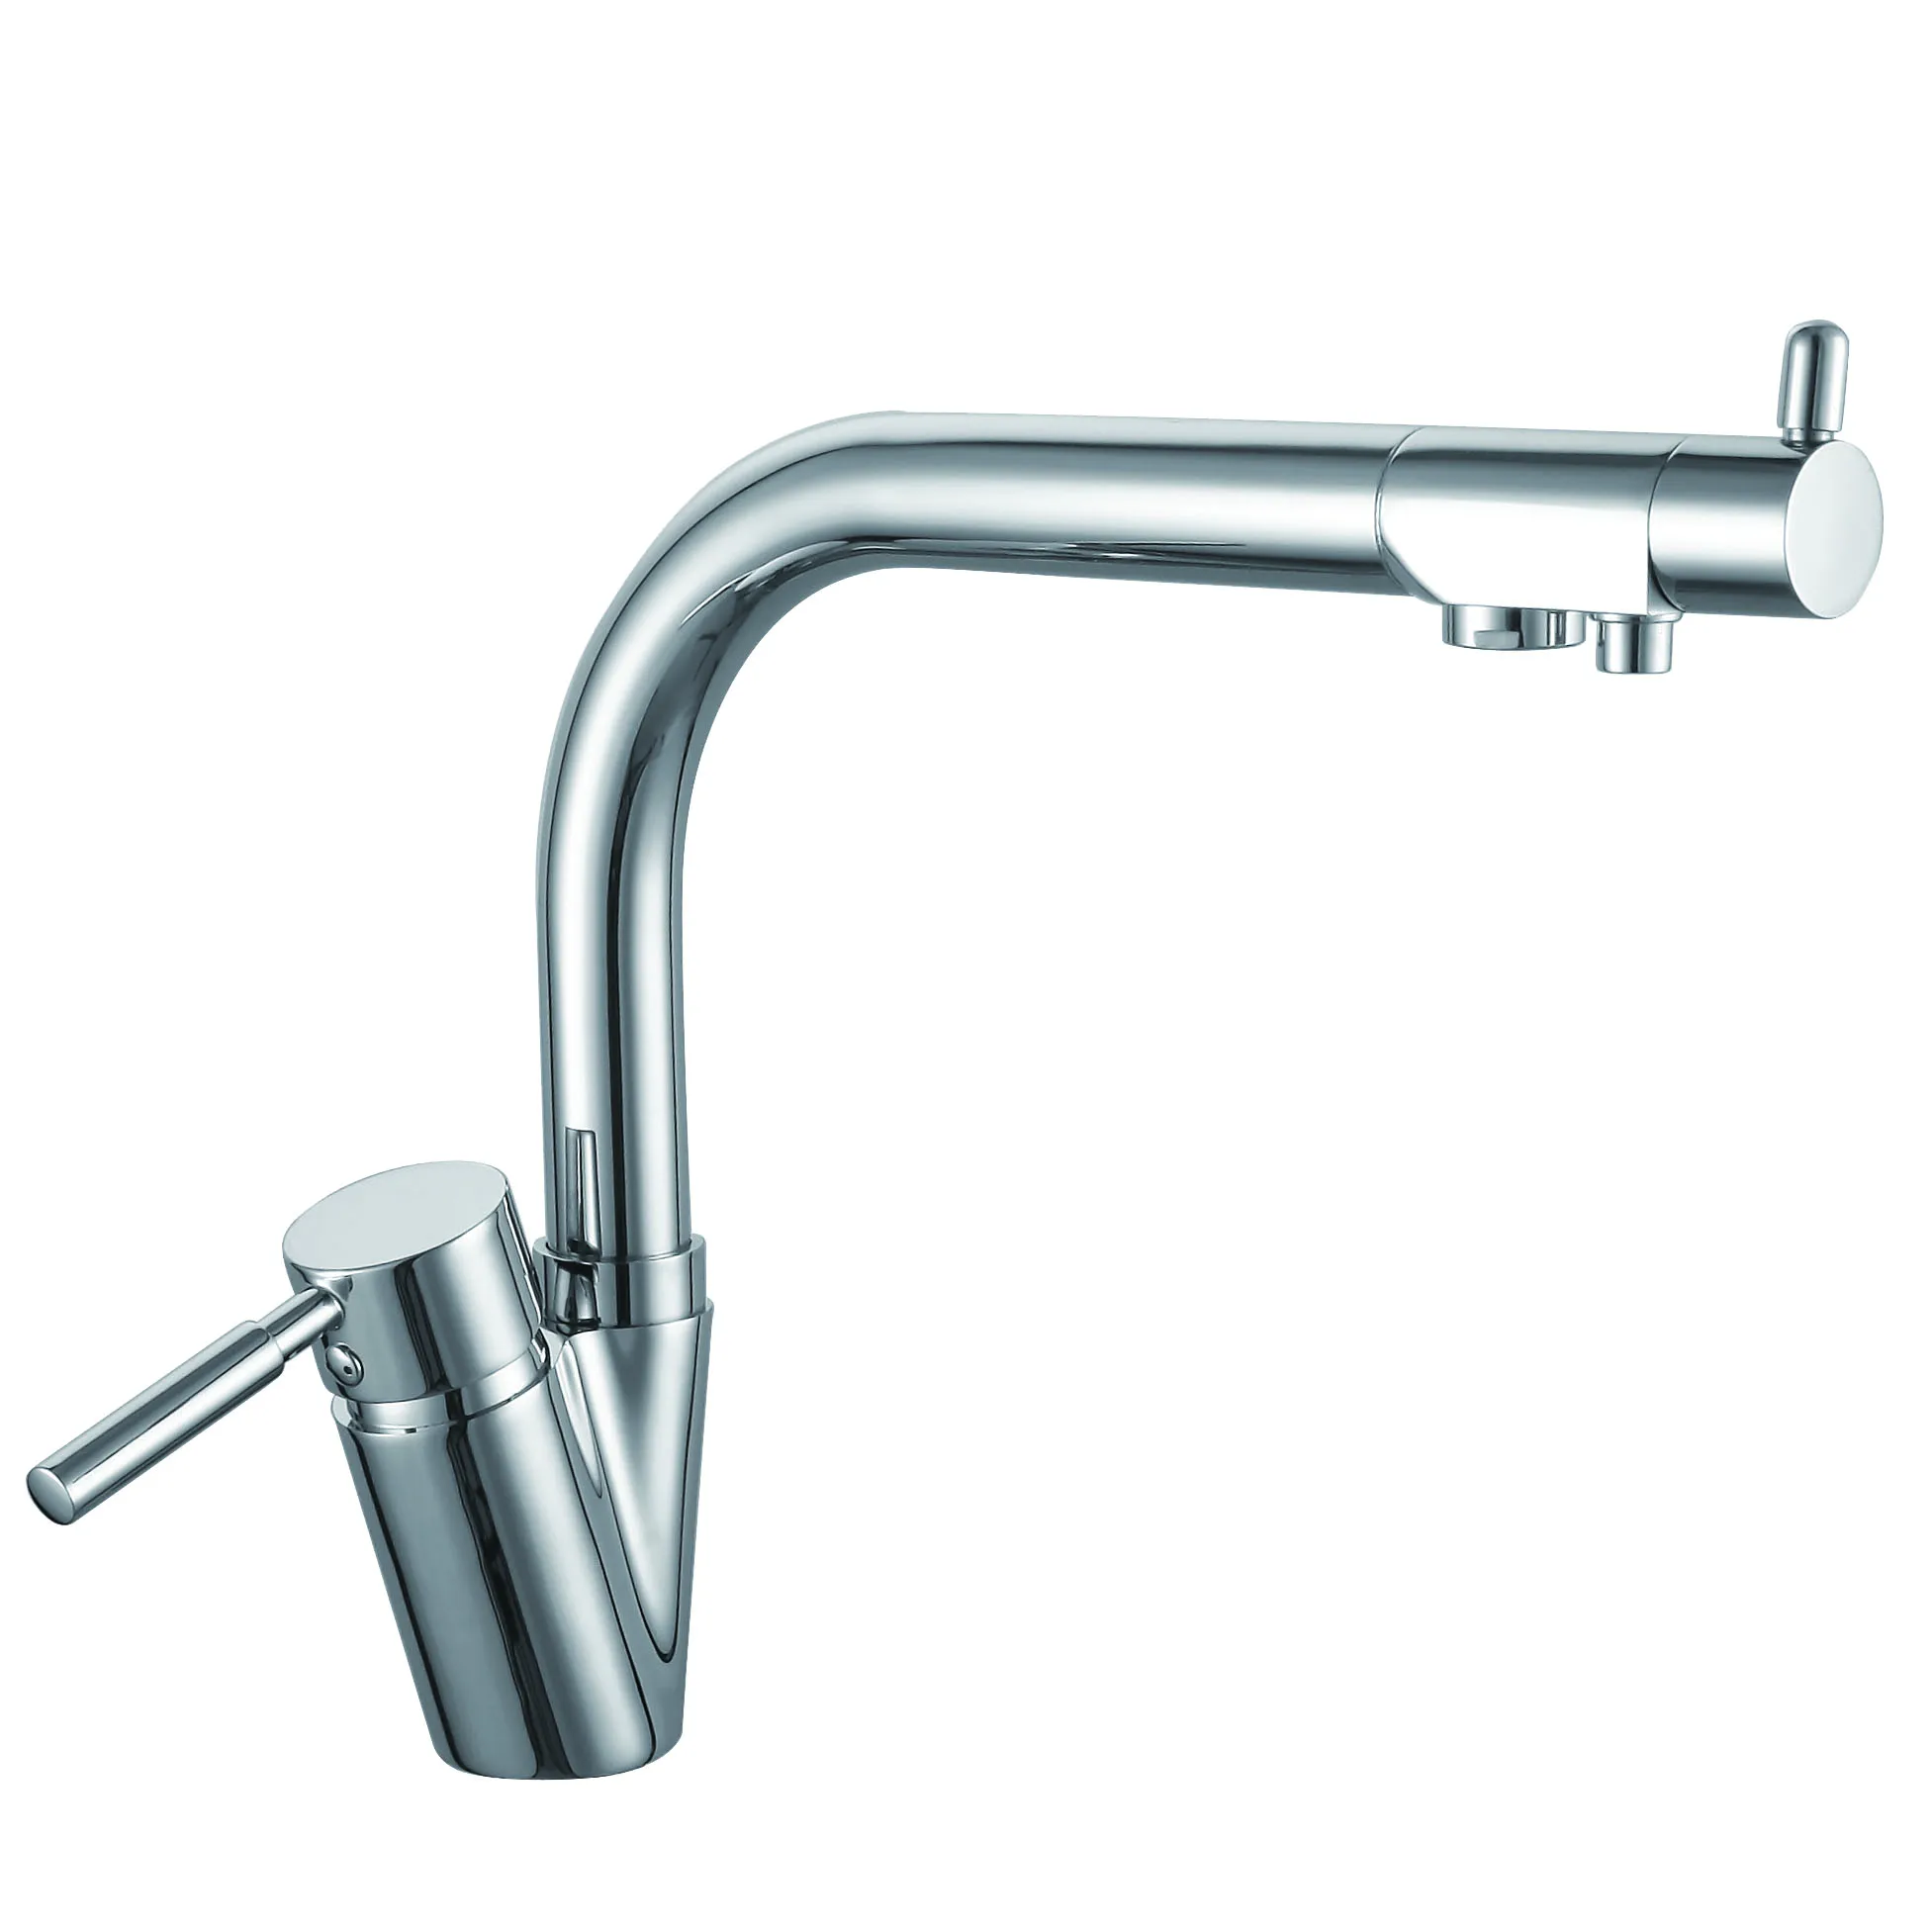 water faucet company